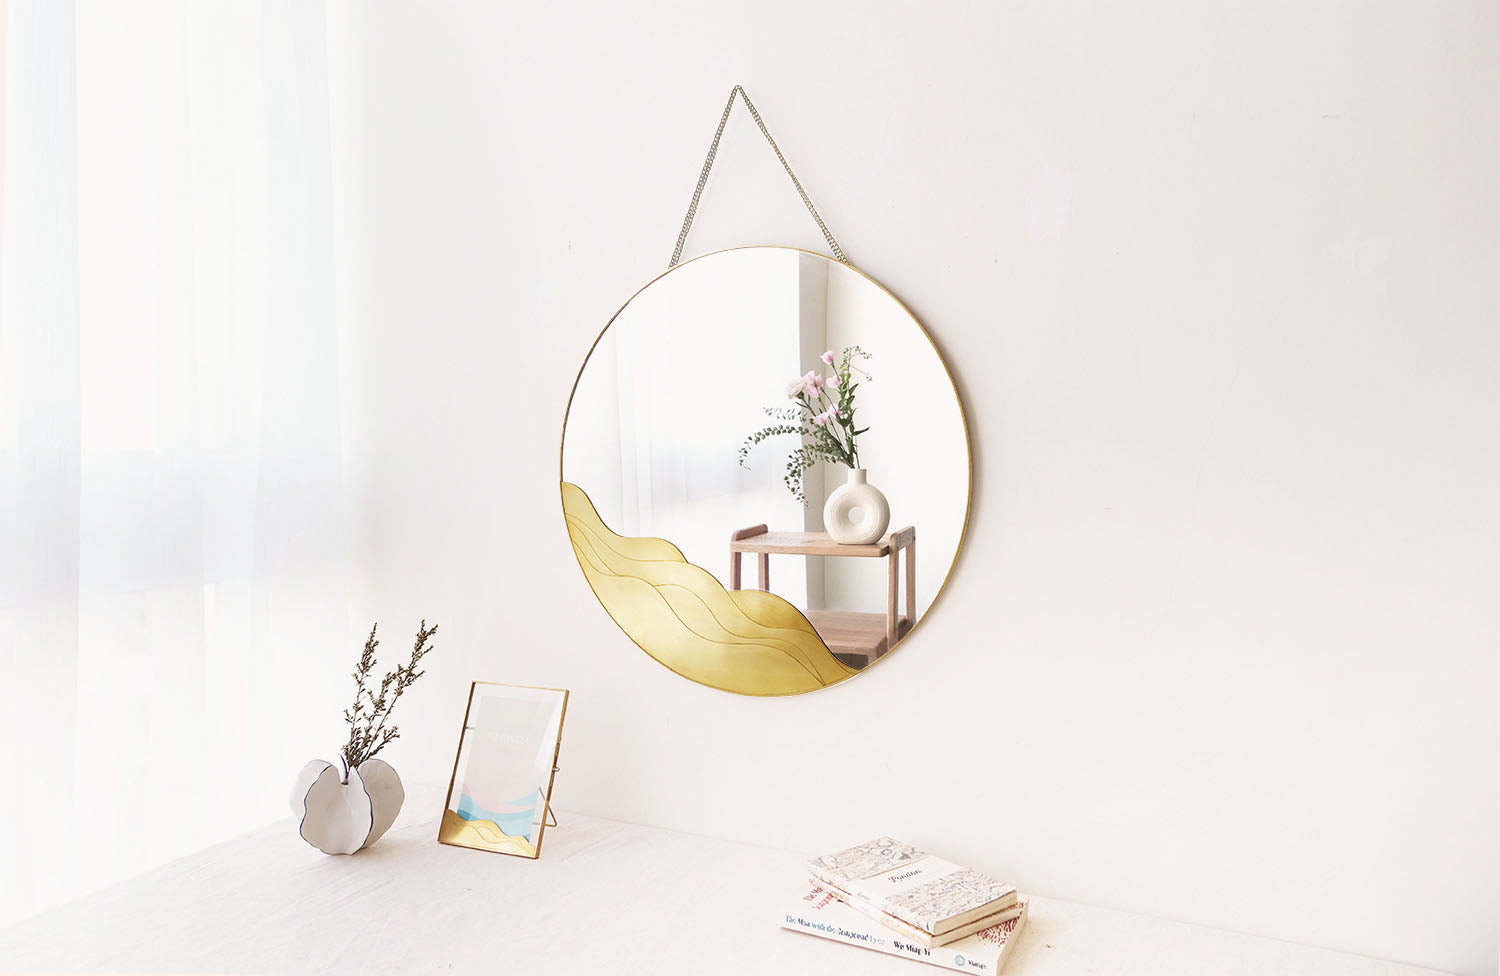 Home Decor: Decorative Wall Mirror- Brass - Wave Design   The most beautiful home decor items and the best home decorating ideas at FONDAZZA. The decorative wall mirror is a stylish home decor in living room and bedroom. Designed with wave shape brass to create a visual illusion as a moon on the sea. This Wall mirror decor is sure to bring an artful touch to your space.